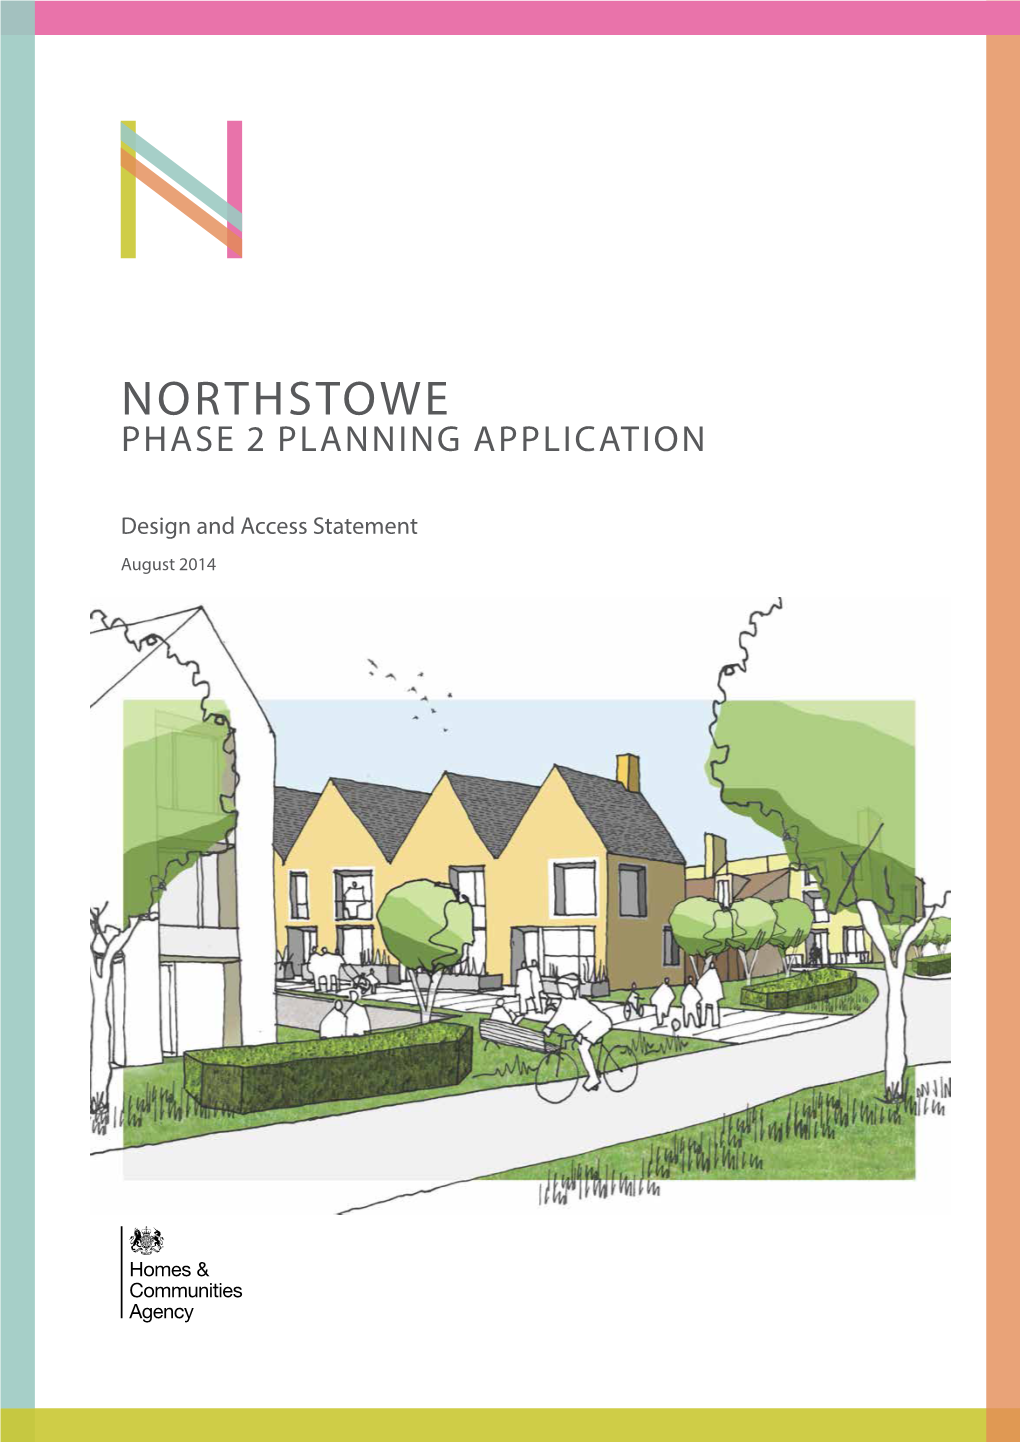 NORTHSTOWE Phase 2 Planning Application